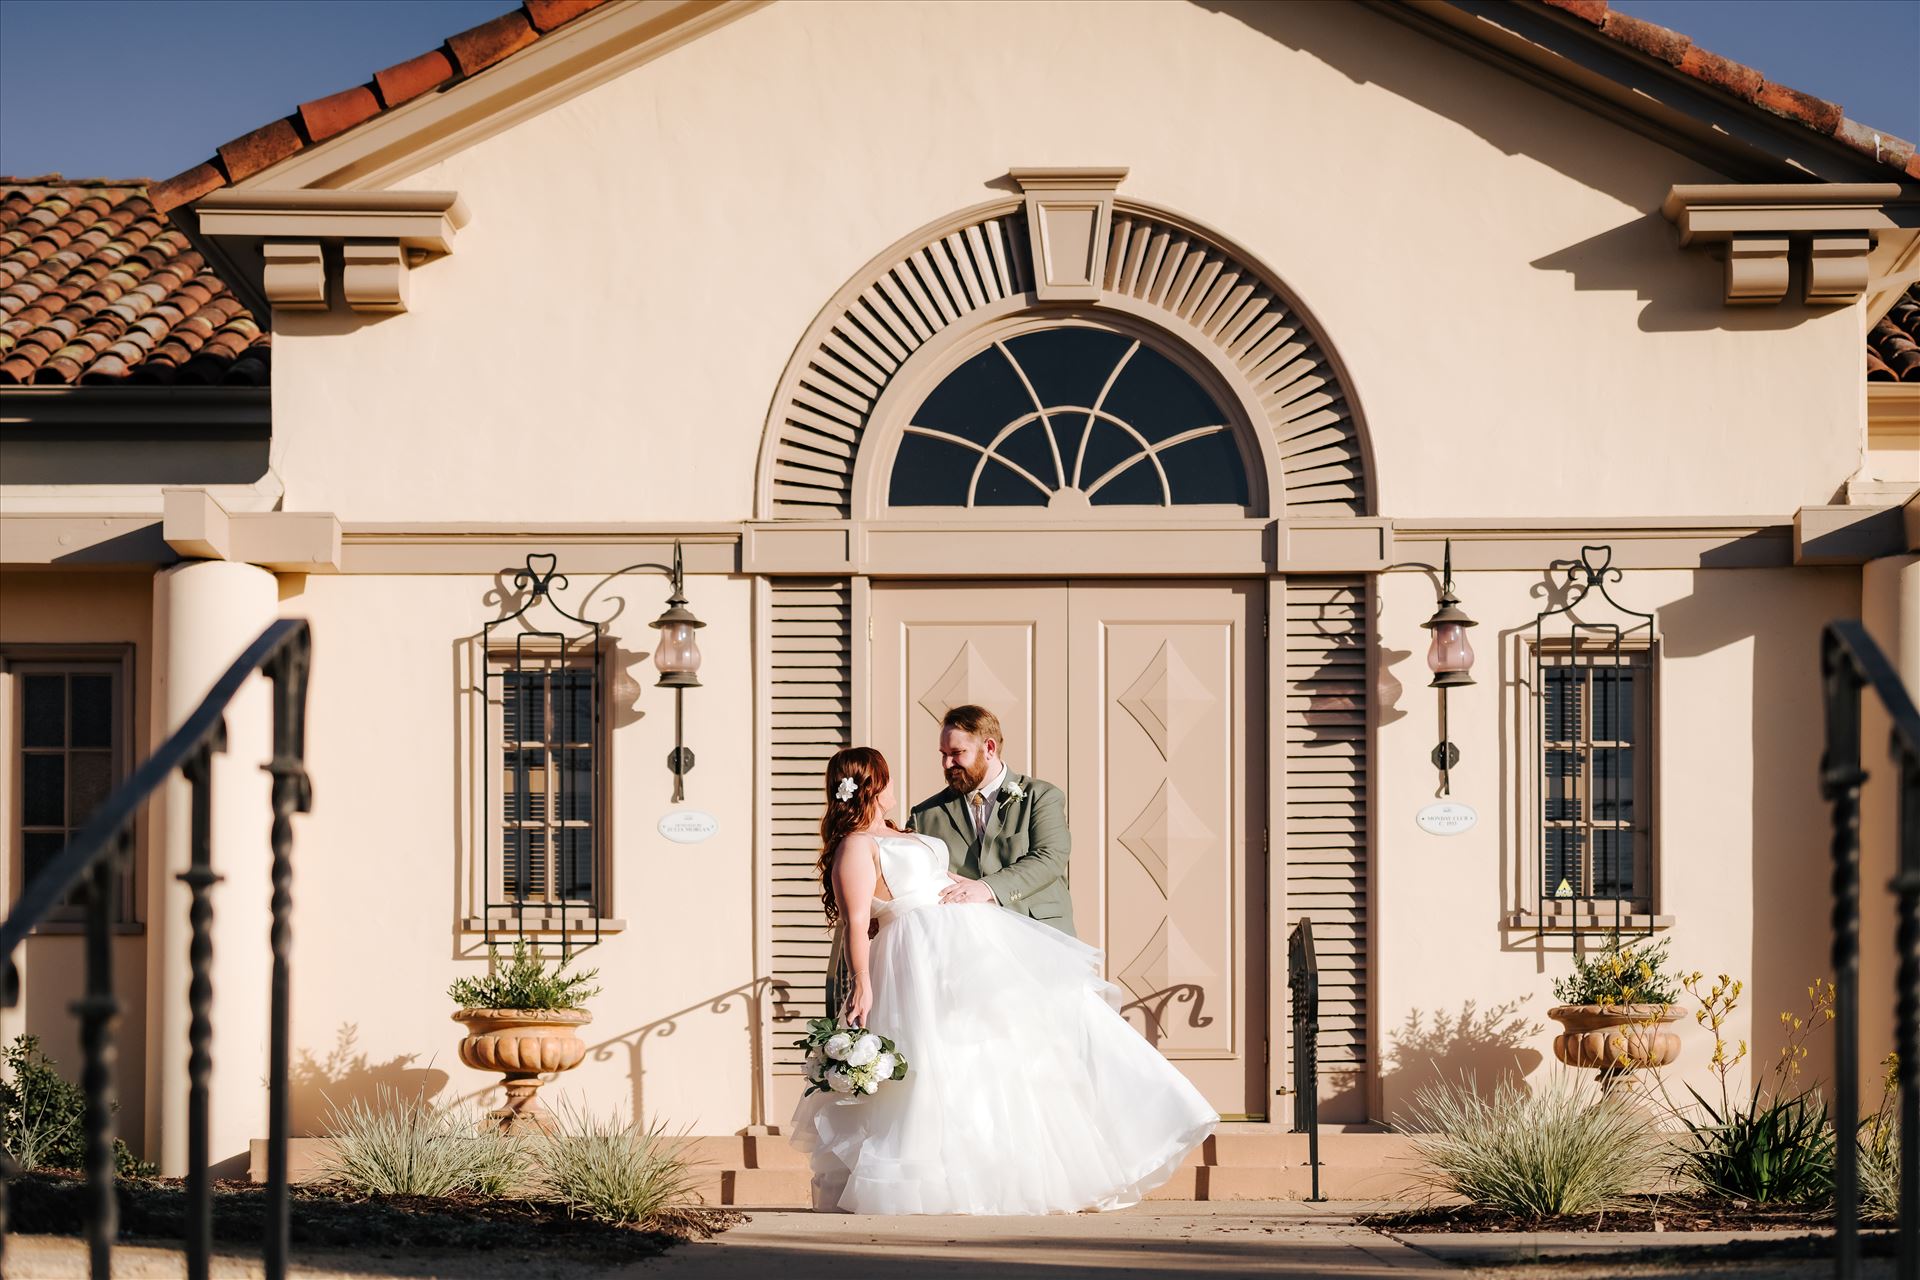 Final-4598.jpgThe Monday Club Wedding San Luis Obispo California in San Luis Obispo County by Mirror's Edge Photography.  Amazing venue for intimate weddings with mountain views. Classic Sunset Wedding Bride and Groom with boho chic flair.